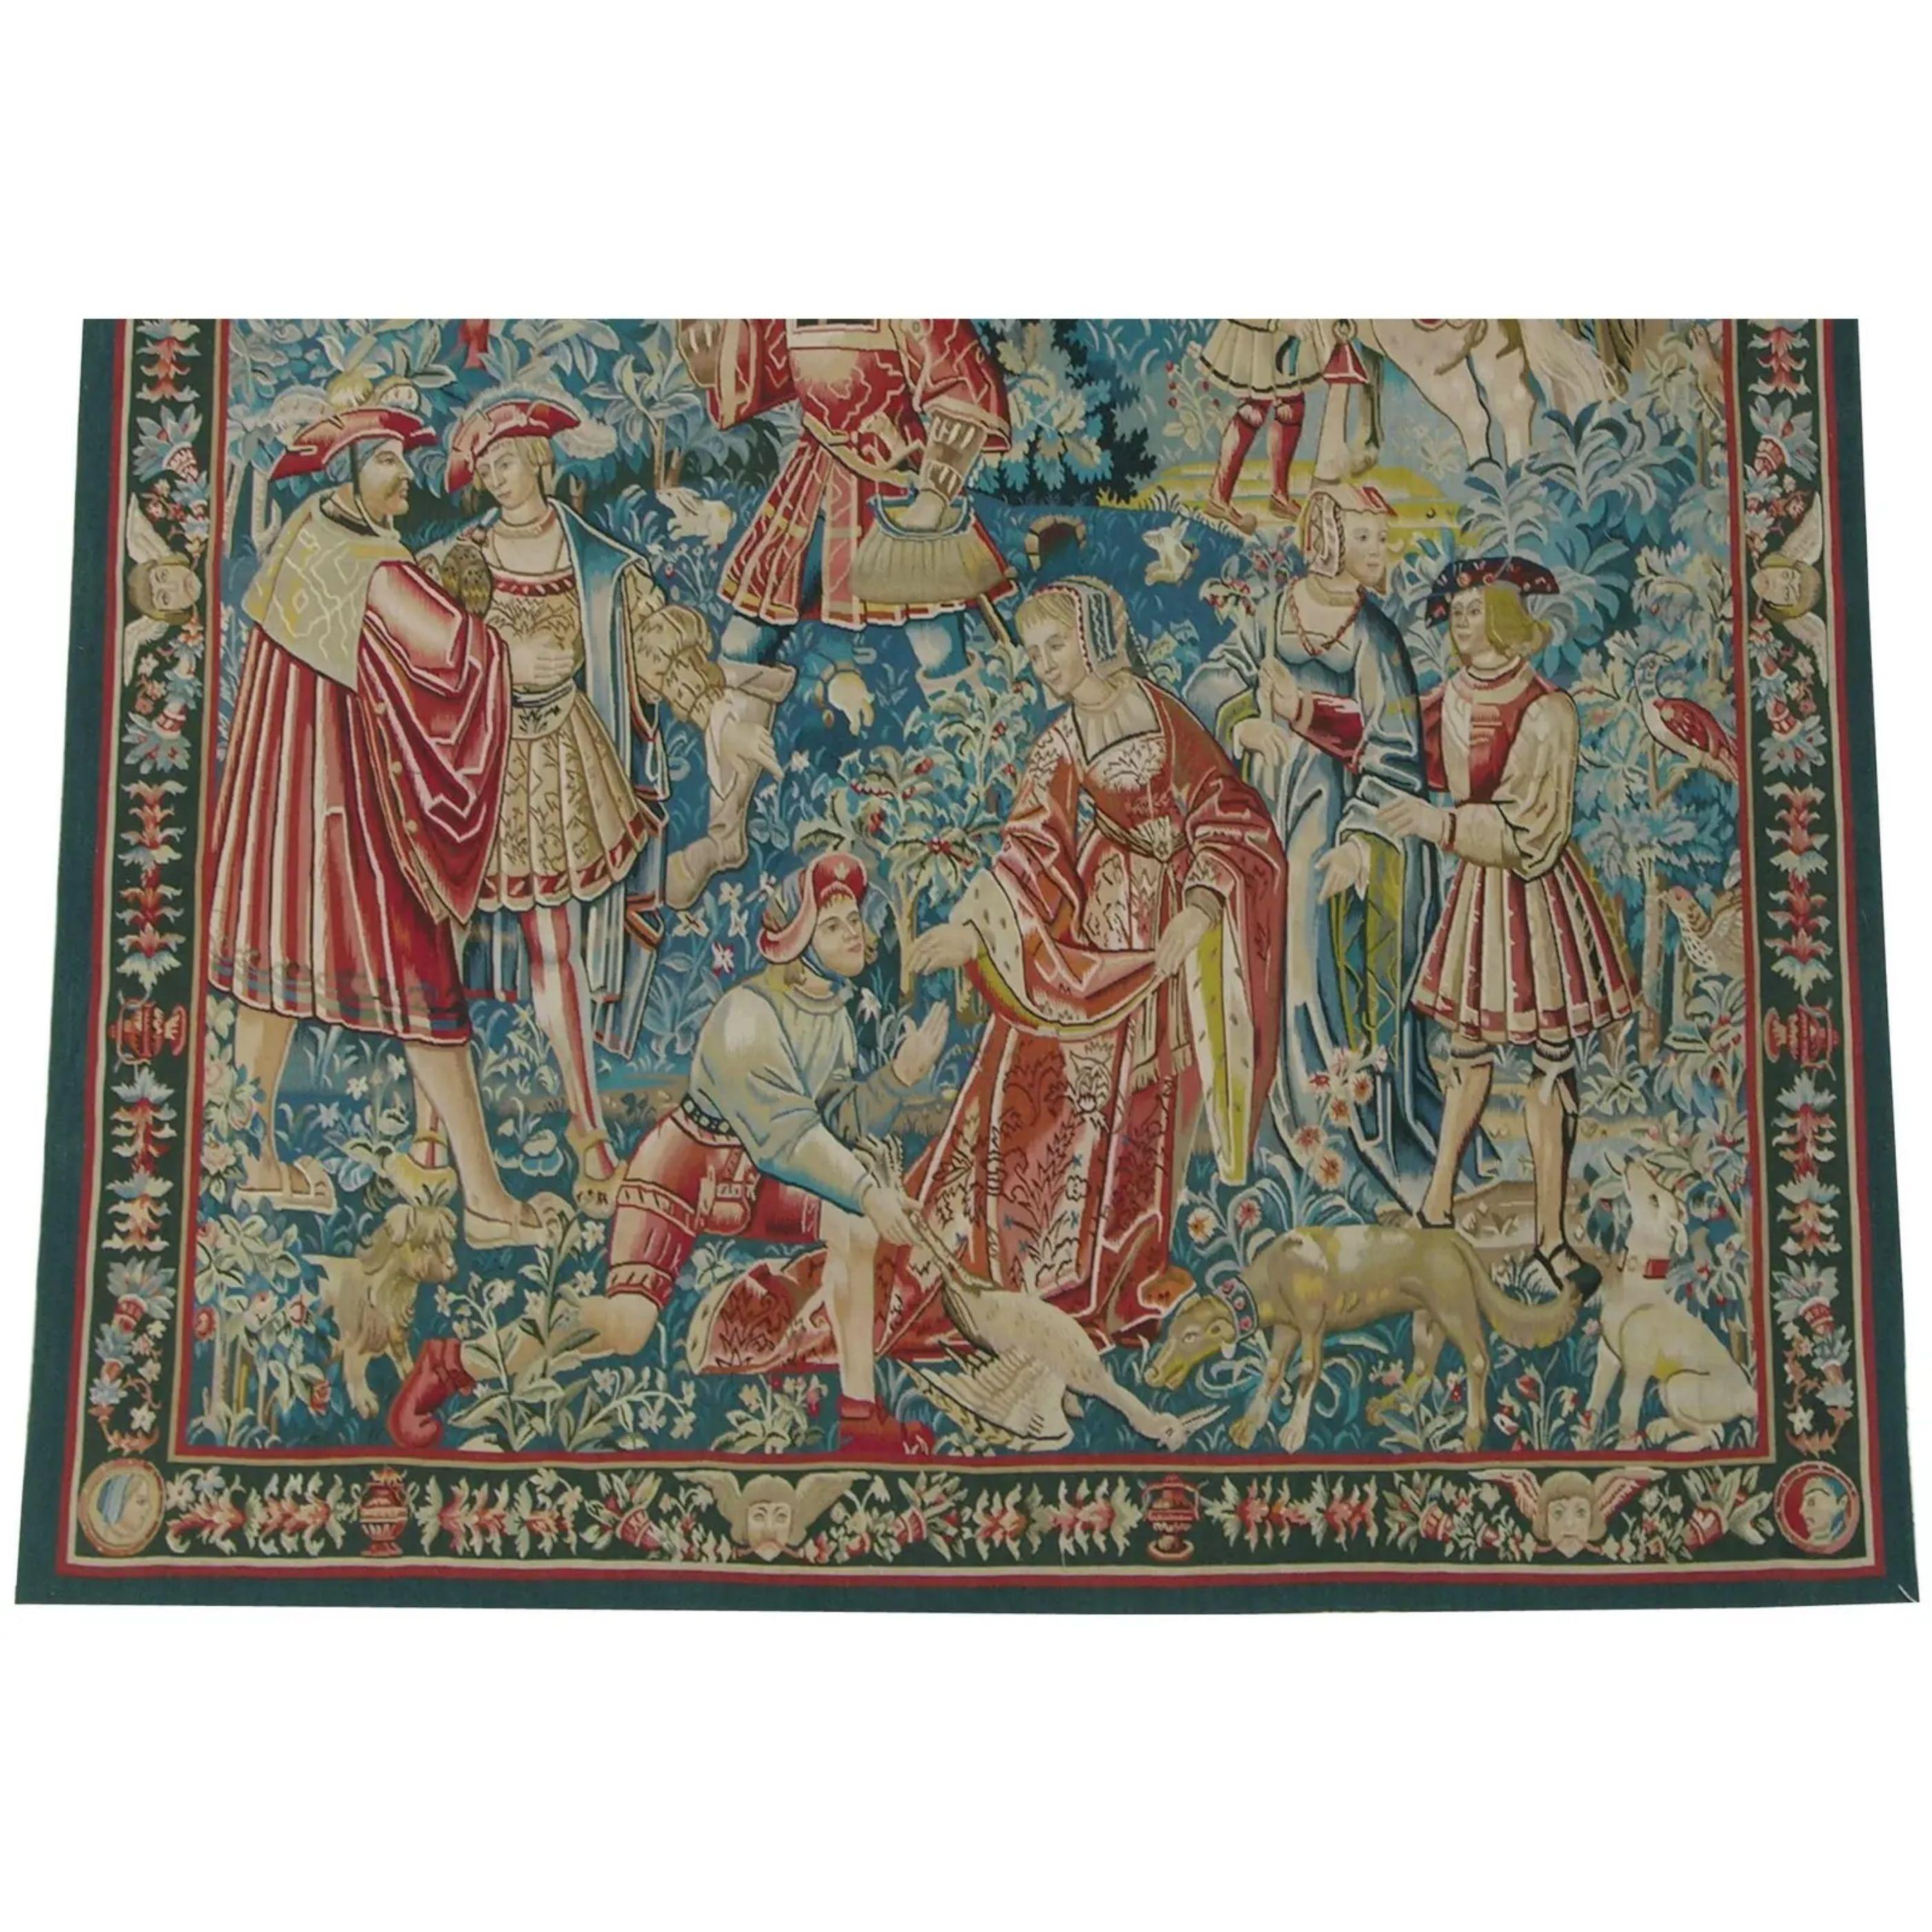 Unknown Vintage Tapestry Depicting Royal Figures 6.11X6 For Sale